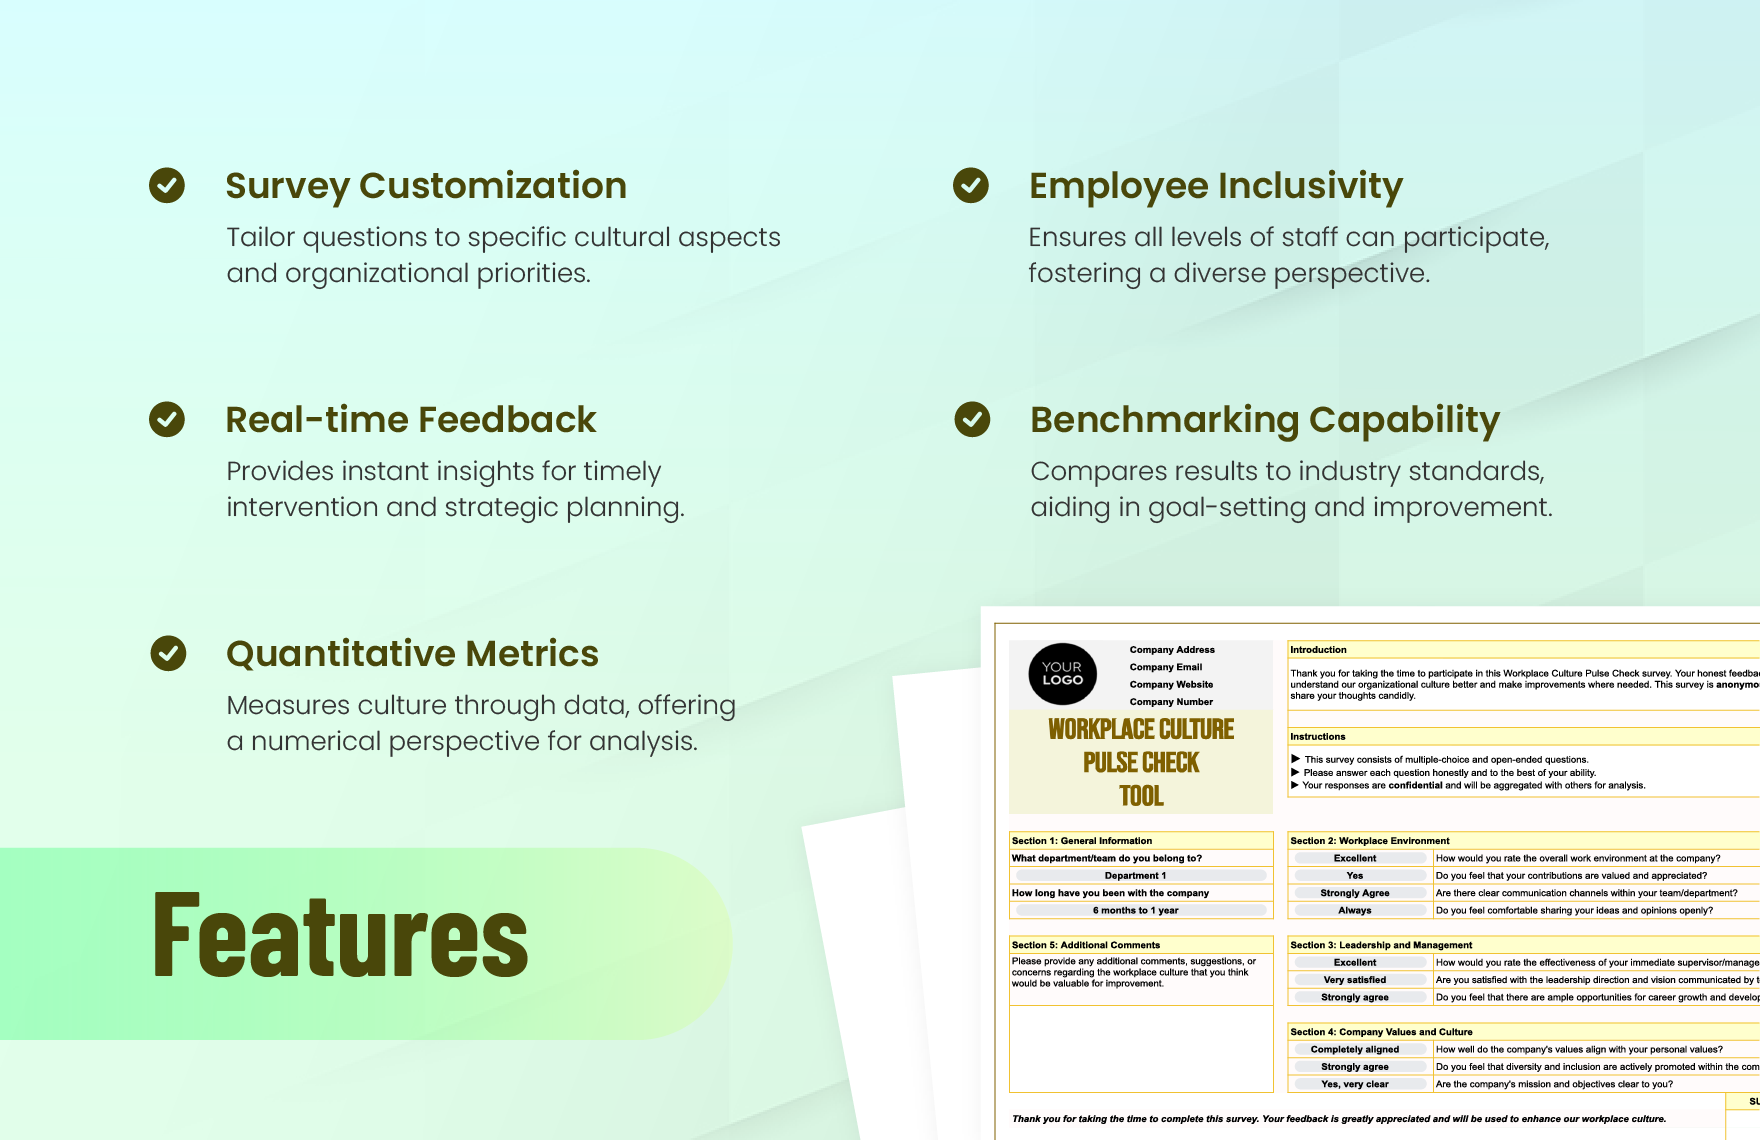 Workplace Culture Pulse Check Tool HR Template